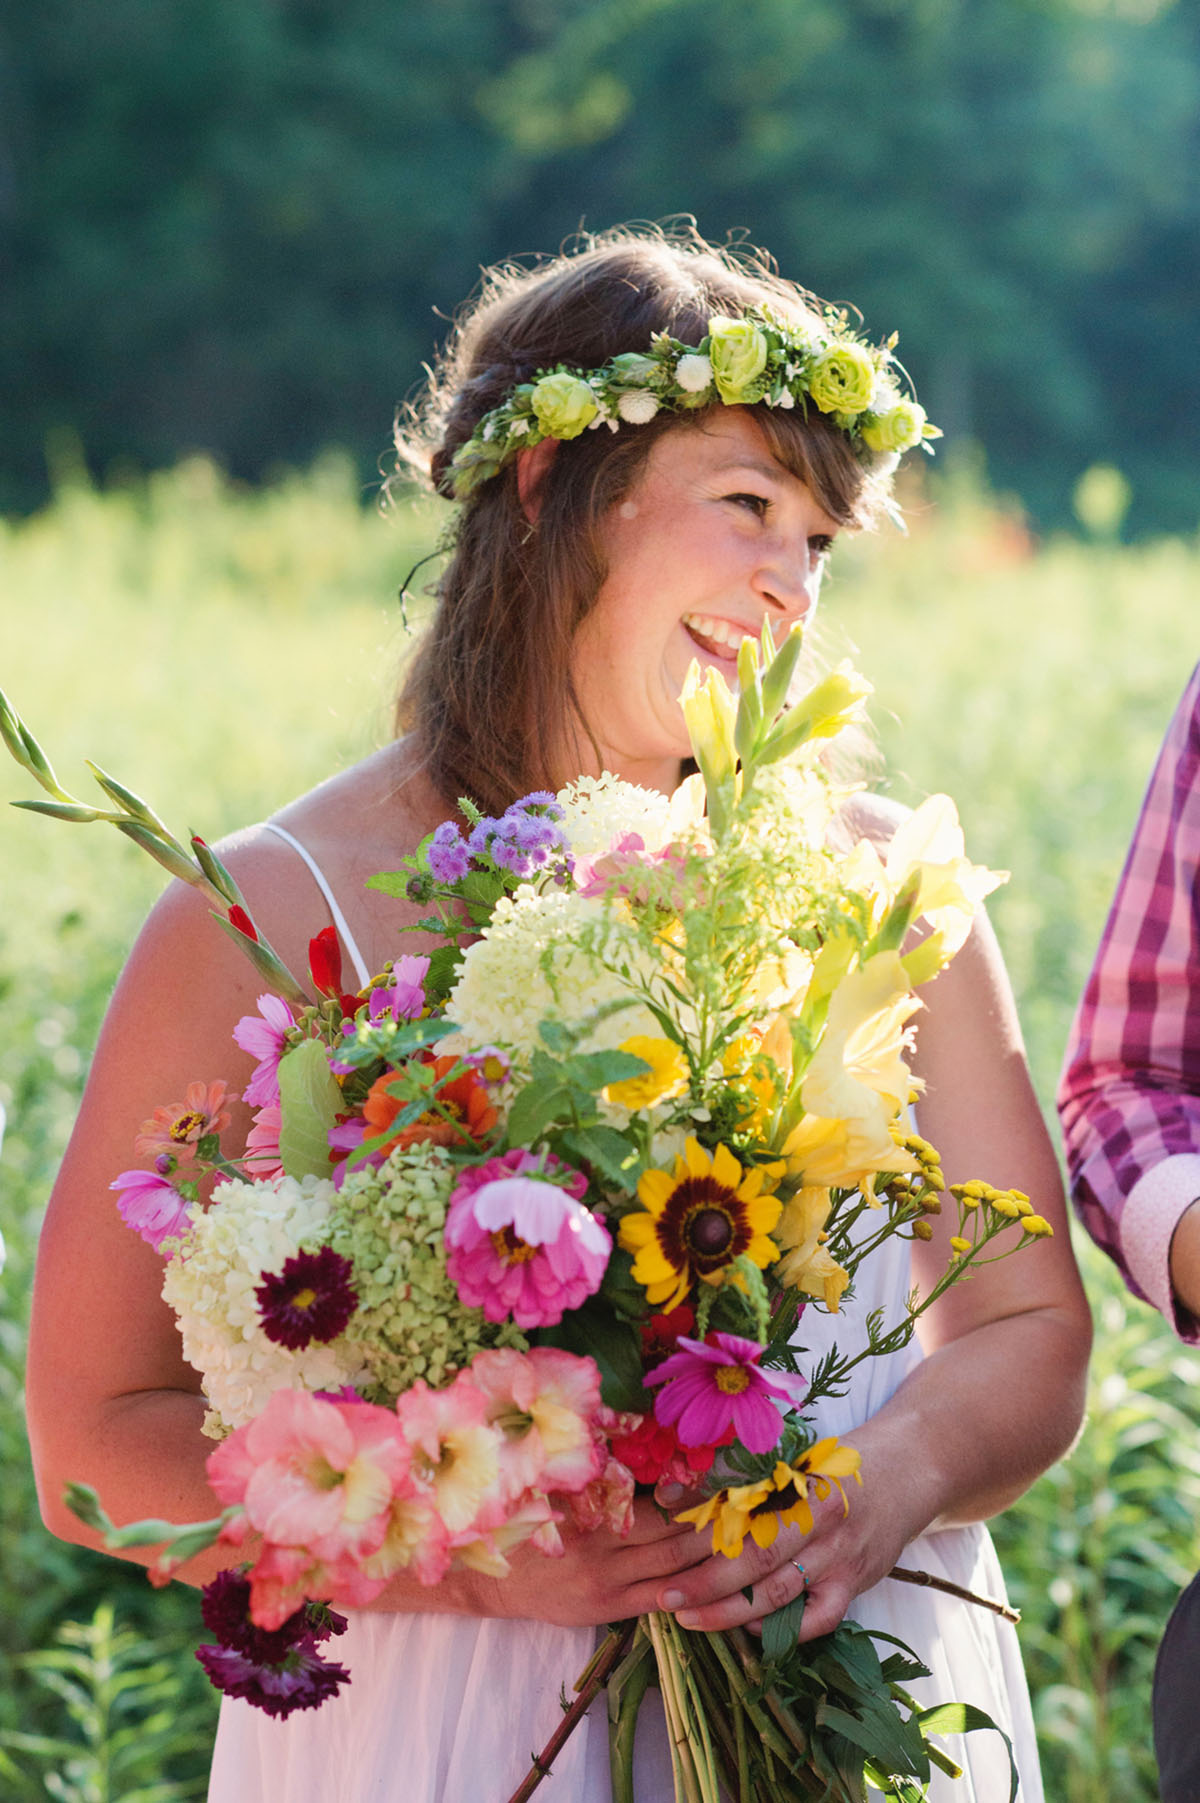 Lesbian wedding with summer garden and creative floral bouquets flowers